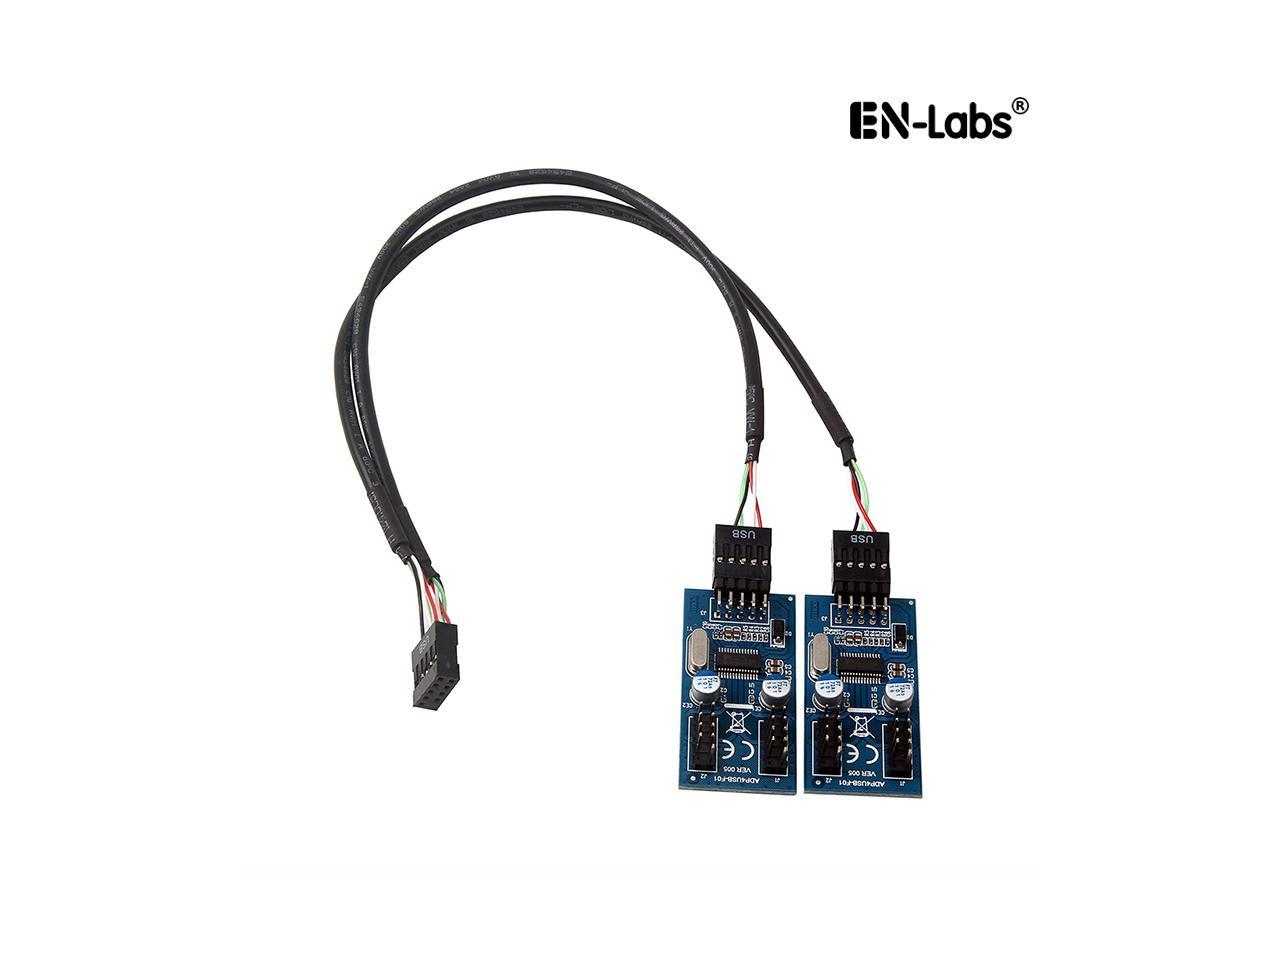 Enlabs INU29P1X4 Motherboard USB 2.0 9pin Header 1 to 4 Extension Hub Splitter Adapter - Converter MB USB 2.0 Male to Male - 30CM USB 9-pin Internal Cable - Newegg.com